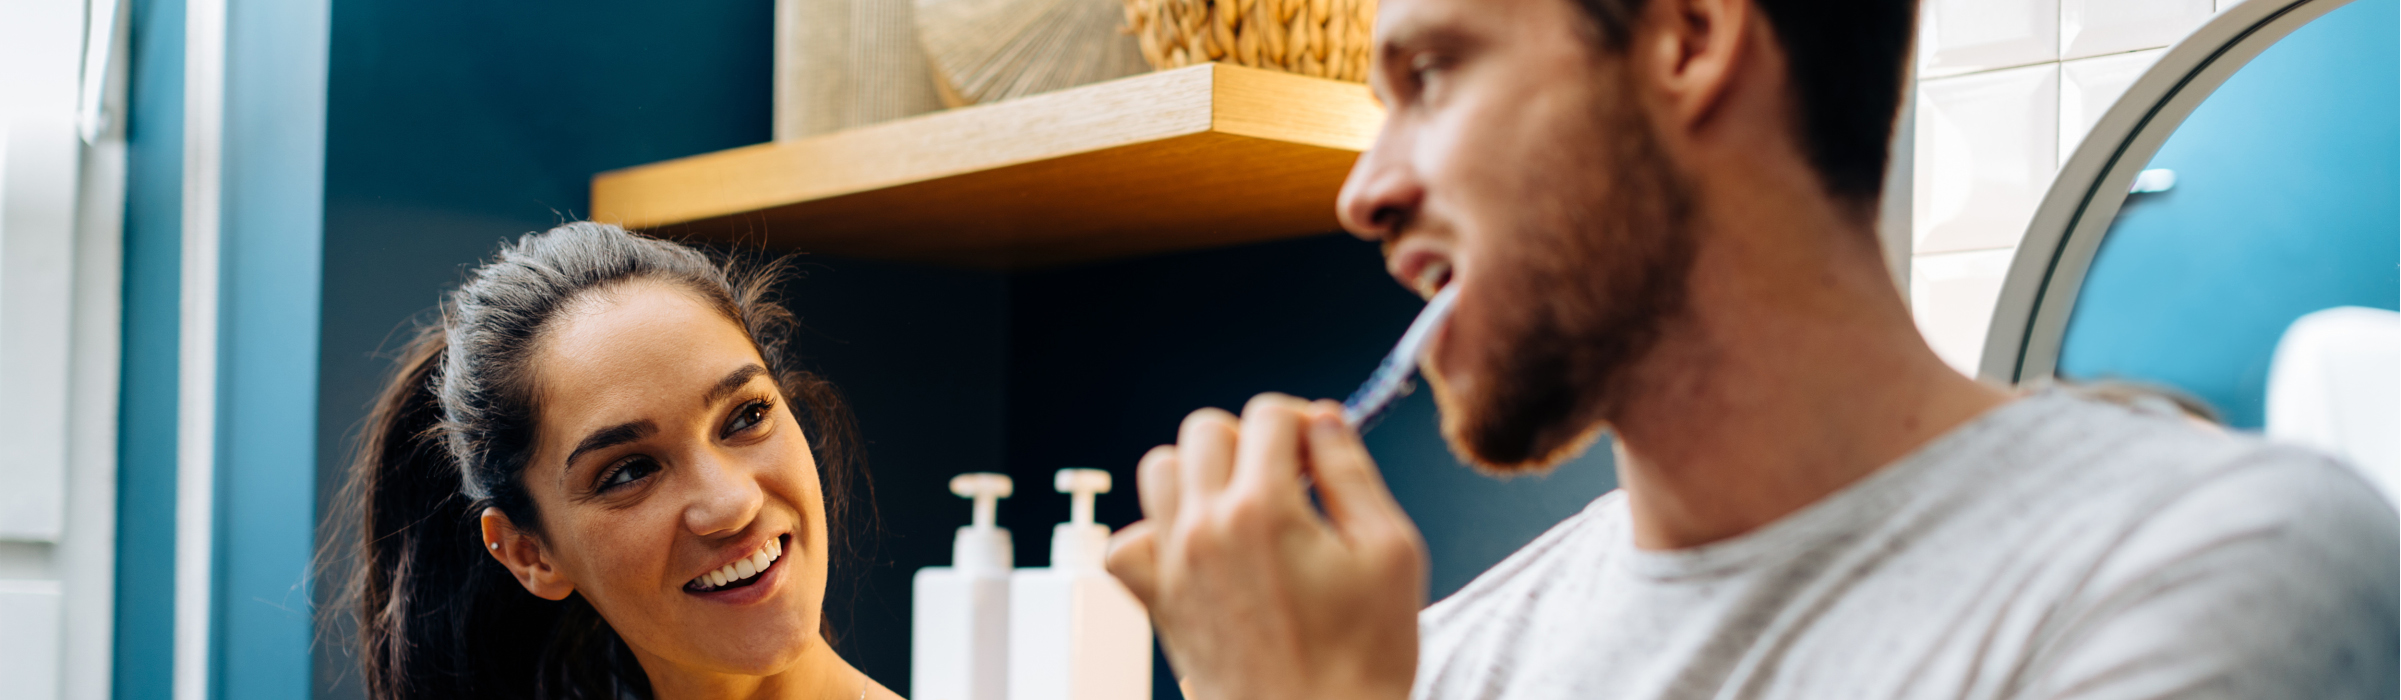 A man brushes his teeth while talking to a woman in the bathroom